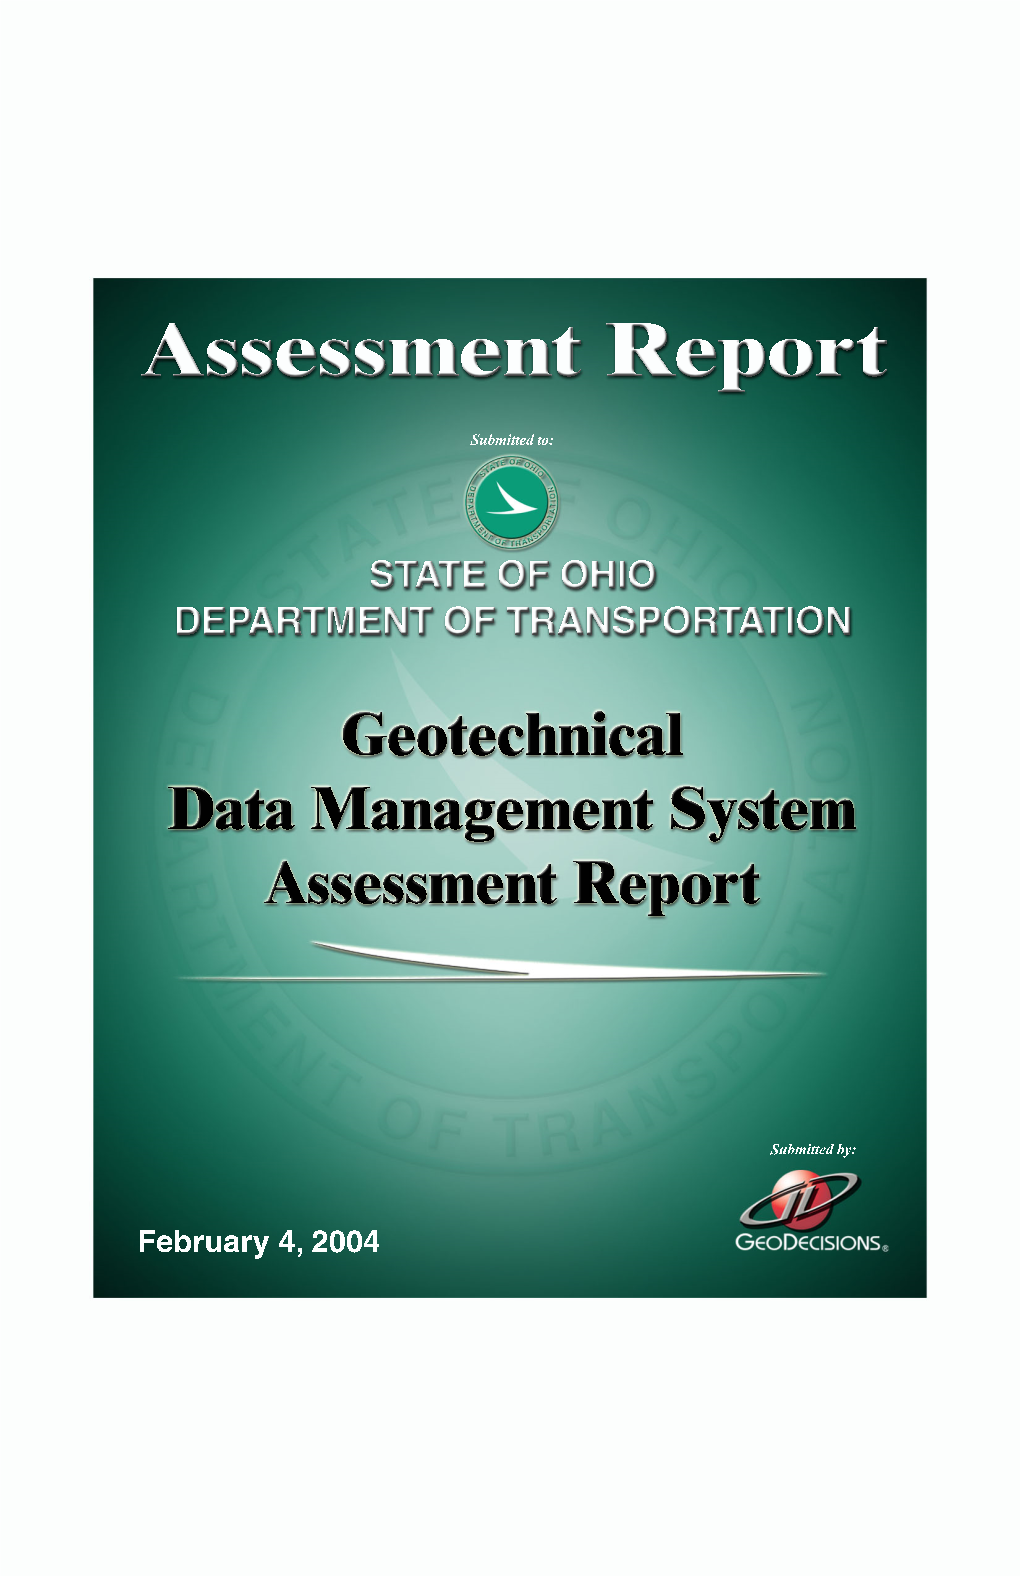 Geotechnical Data Management System Assessment Report